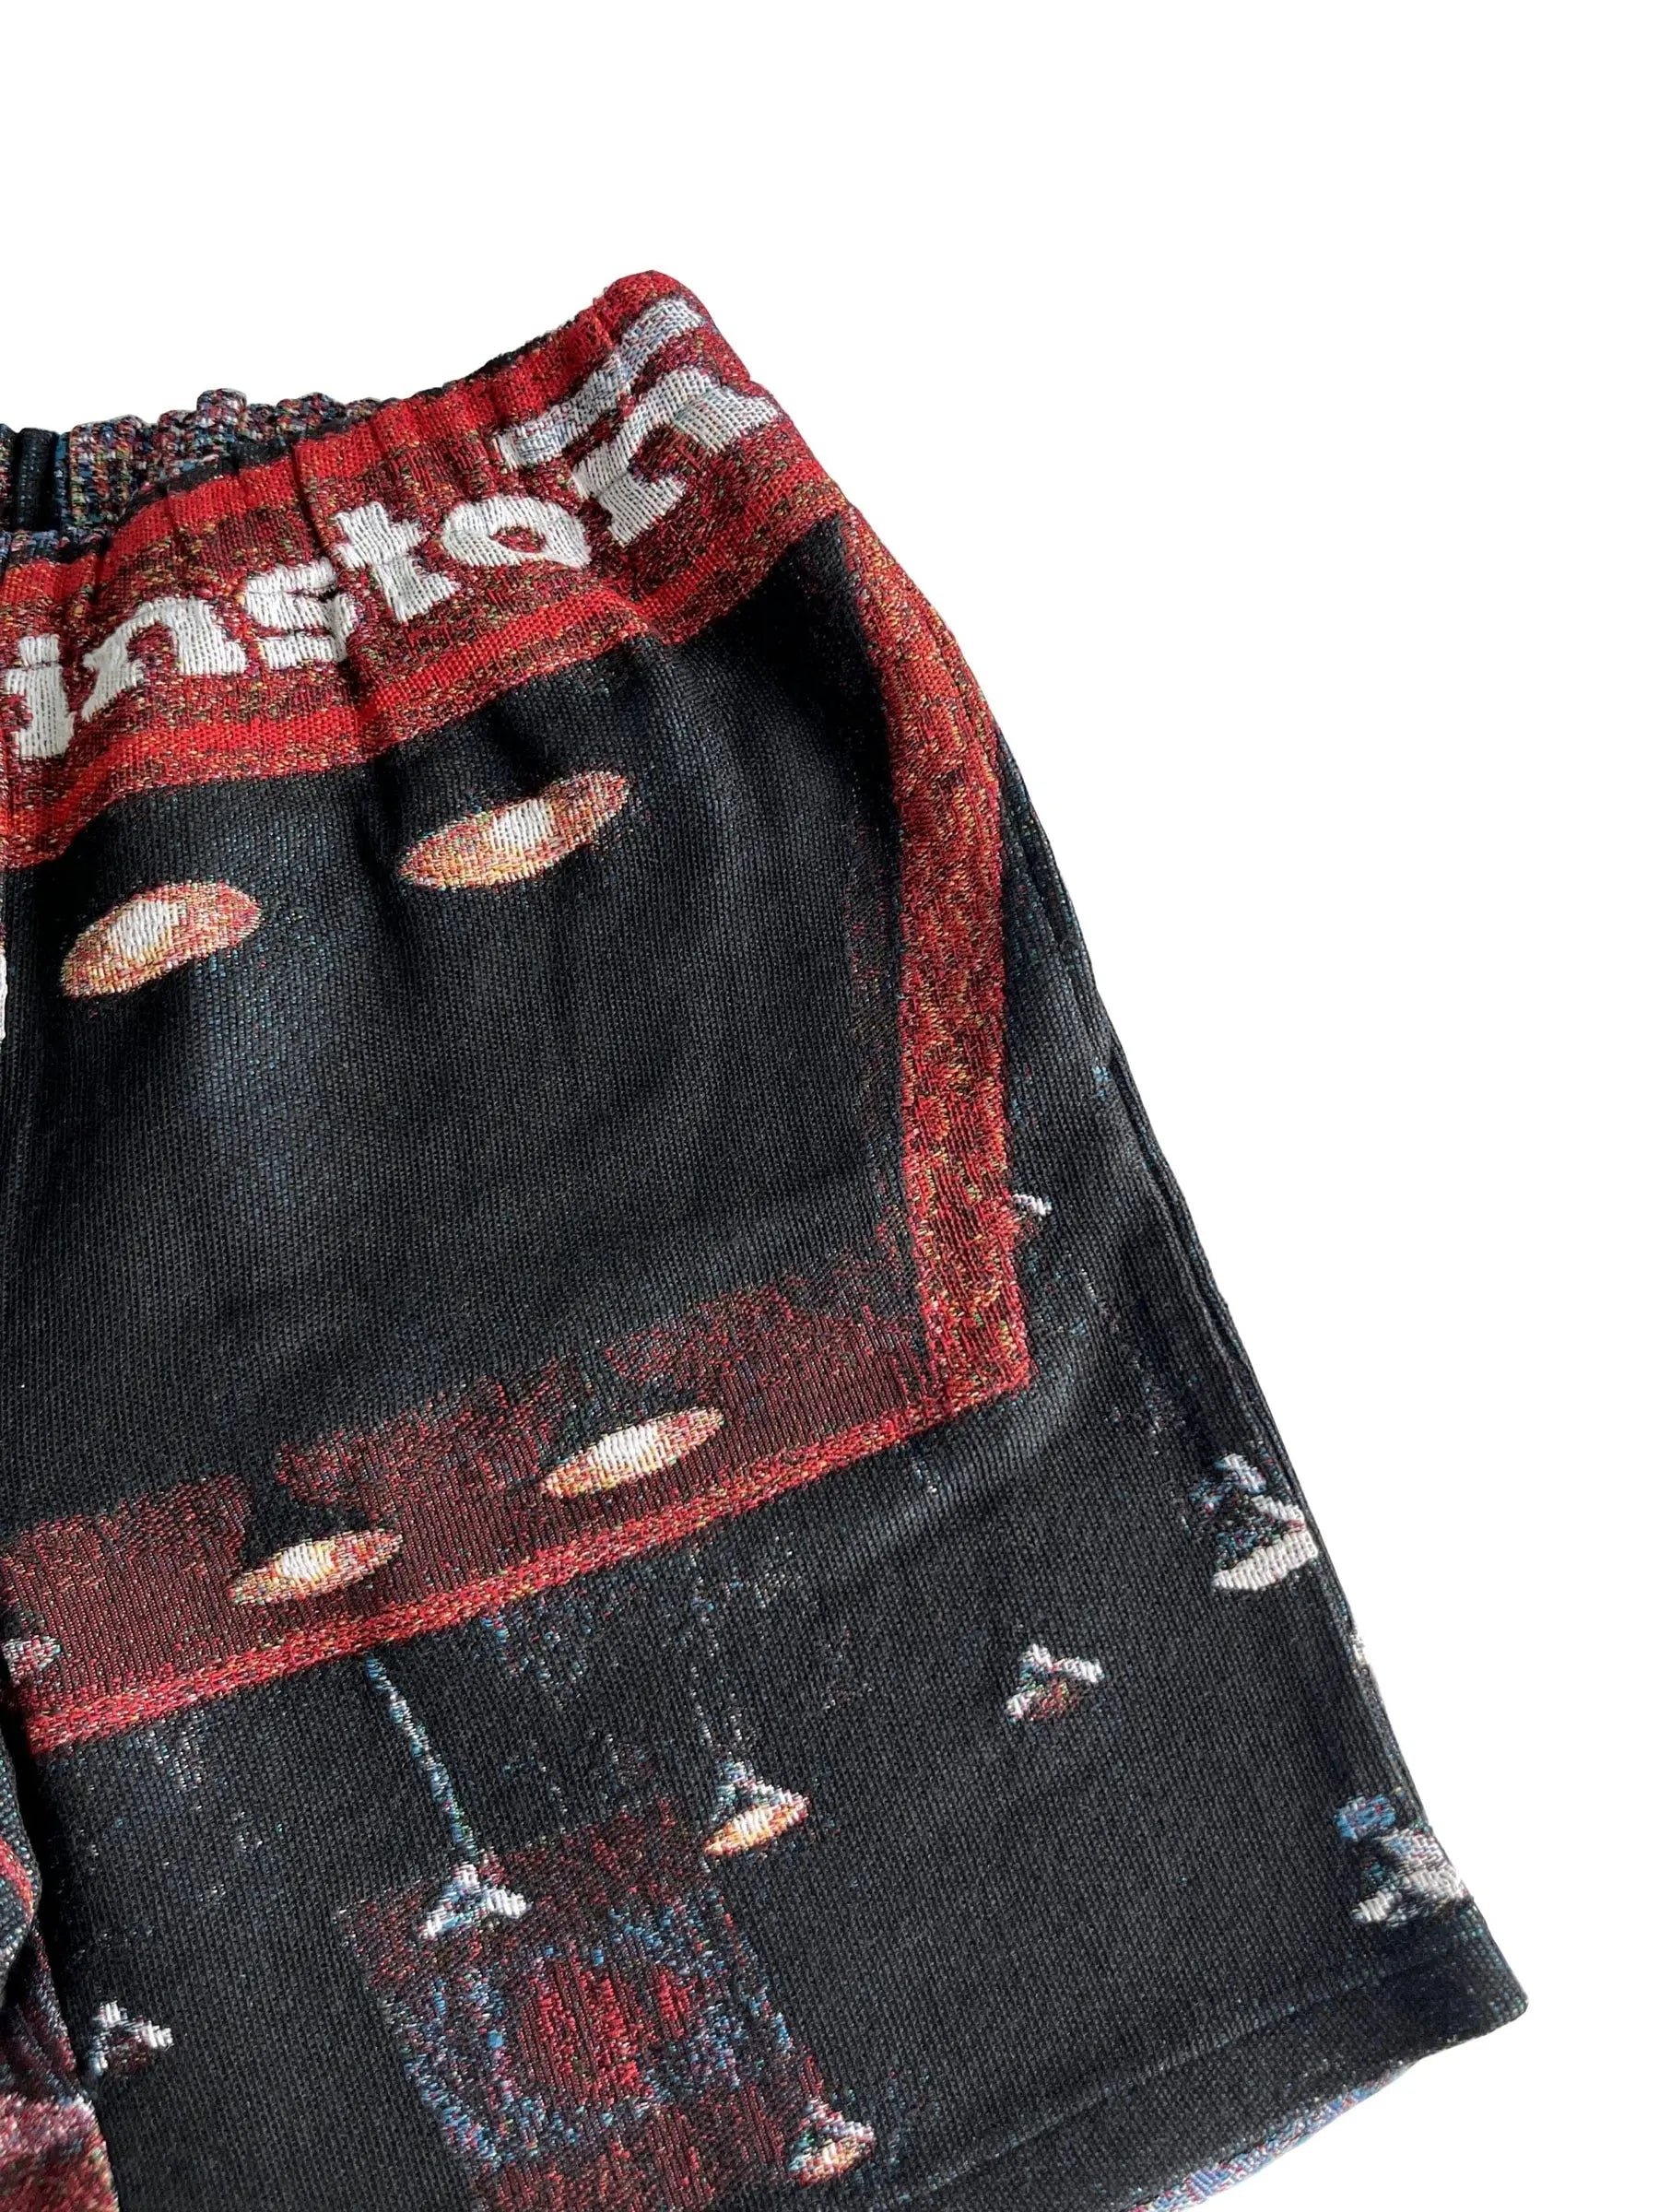 RED MJ DUNK TAPESTRY SHORTS Tapestryifeel